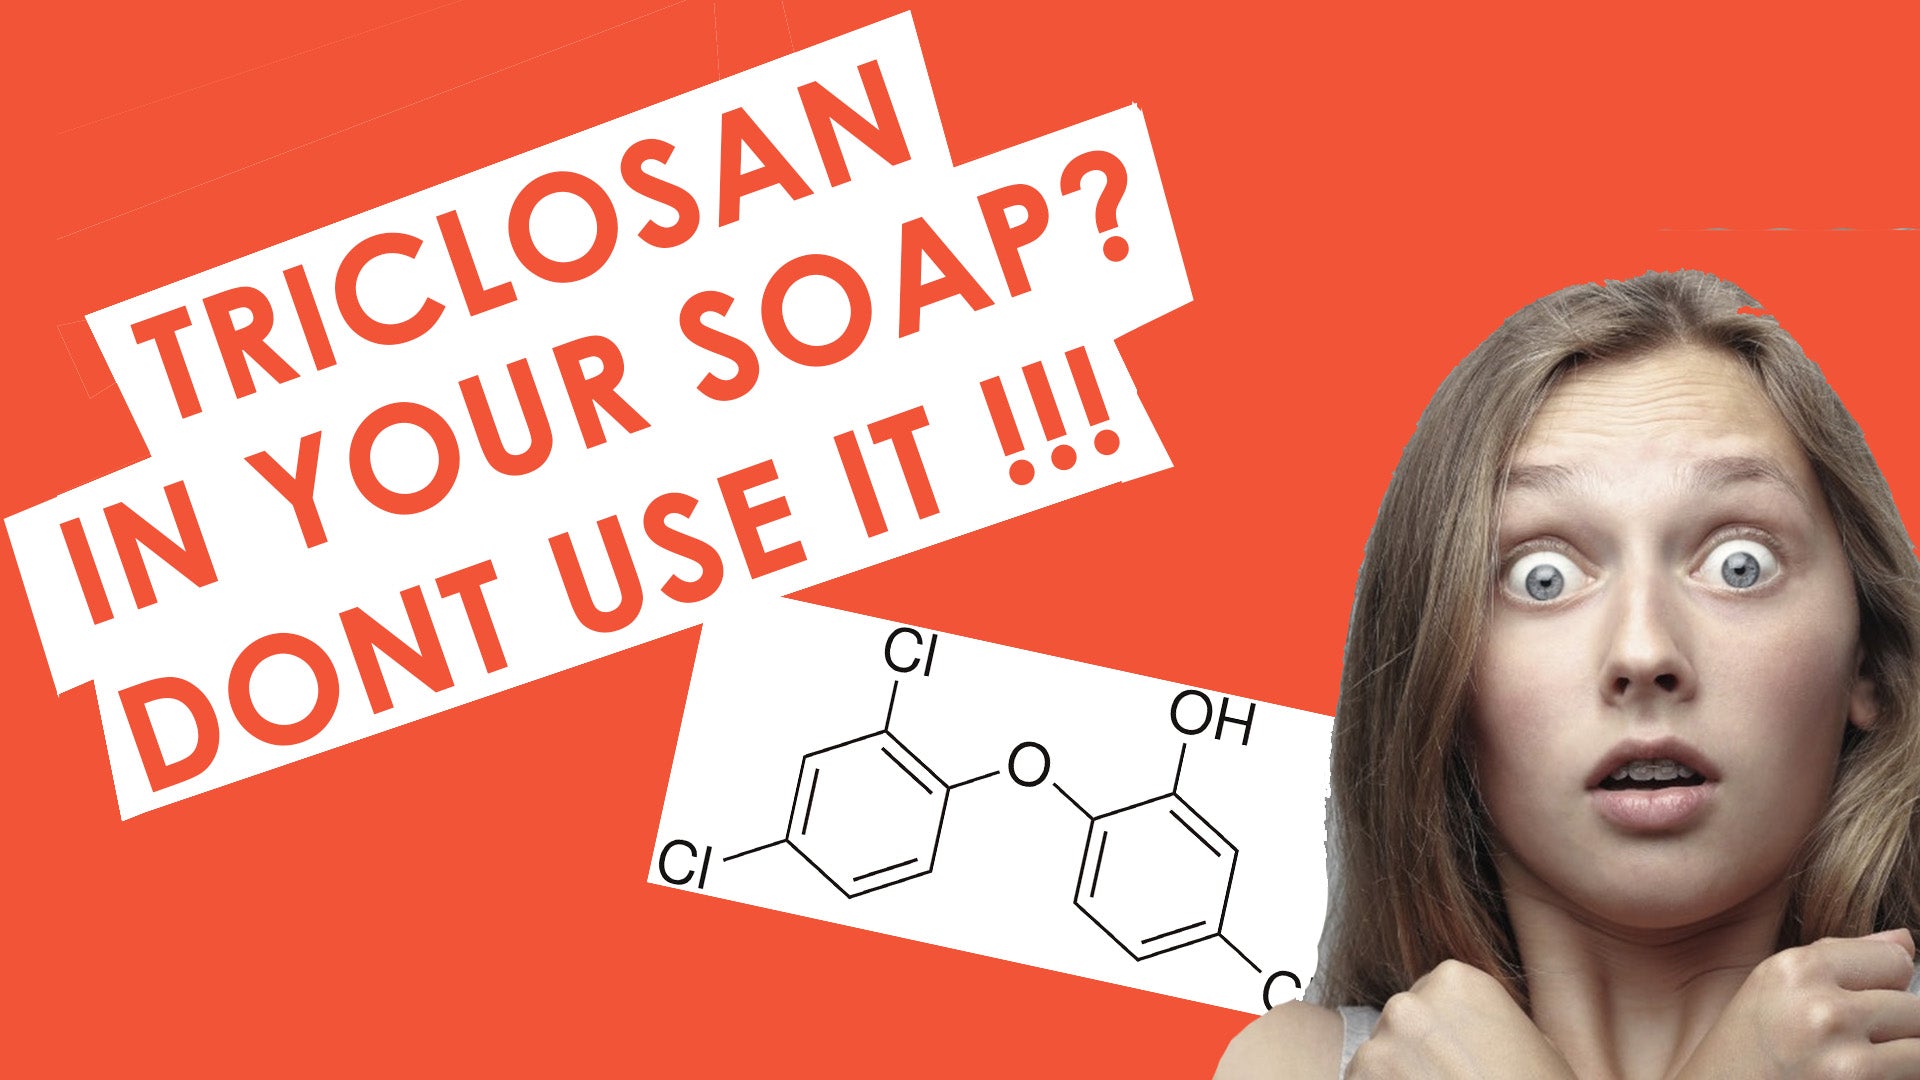 Still using soap with Triclosan? Don't! Here is why...